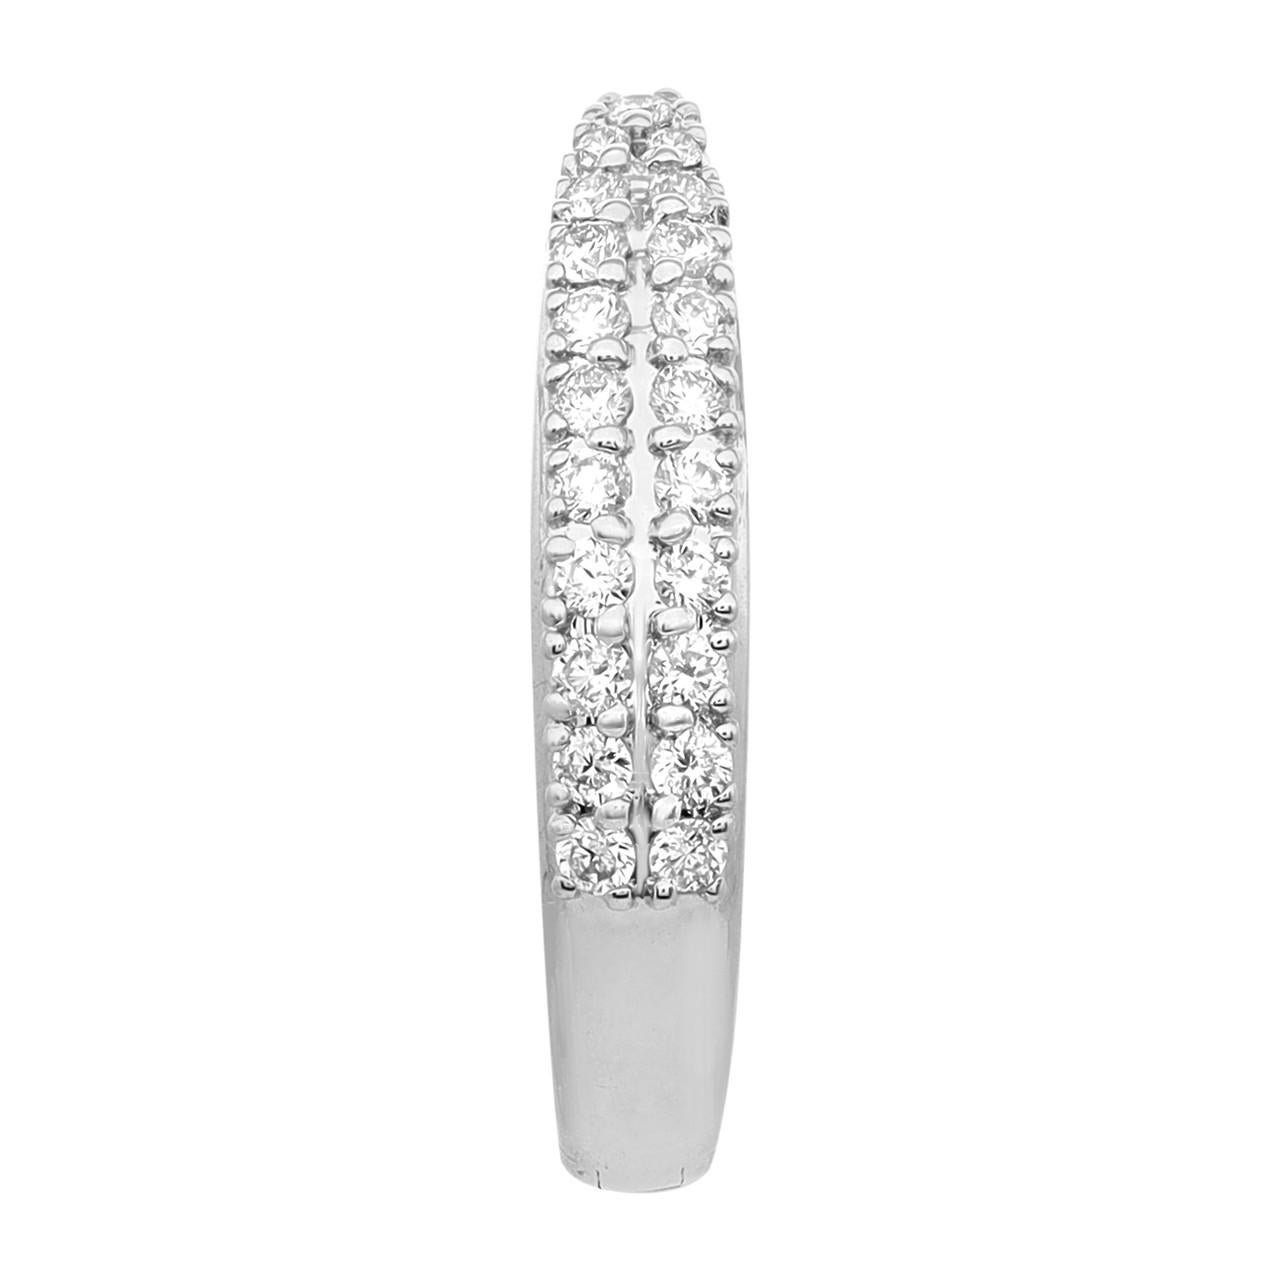 Indulge in sheer elegance with the exquisite 0.40 Carat Diamond Huggie Earrings in 18K White Gold. These huggie earrings are the epitome of sophistication and charm. Each earring showcases two rows of dazzling diamonds, meticulously set in striking